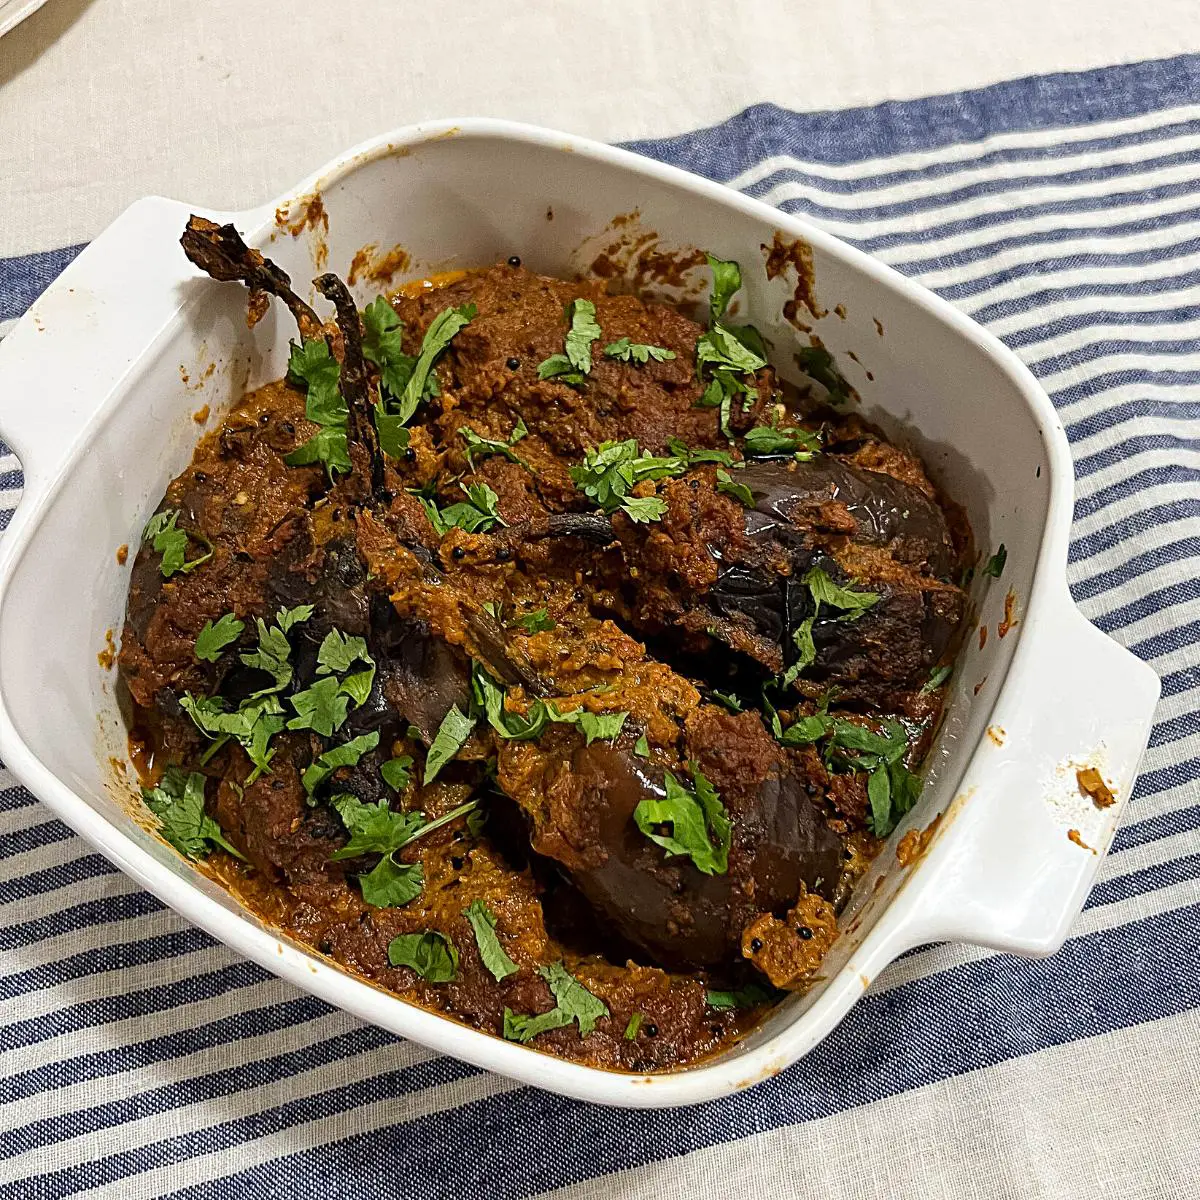 A serving dish with eggplant masala.